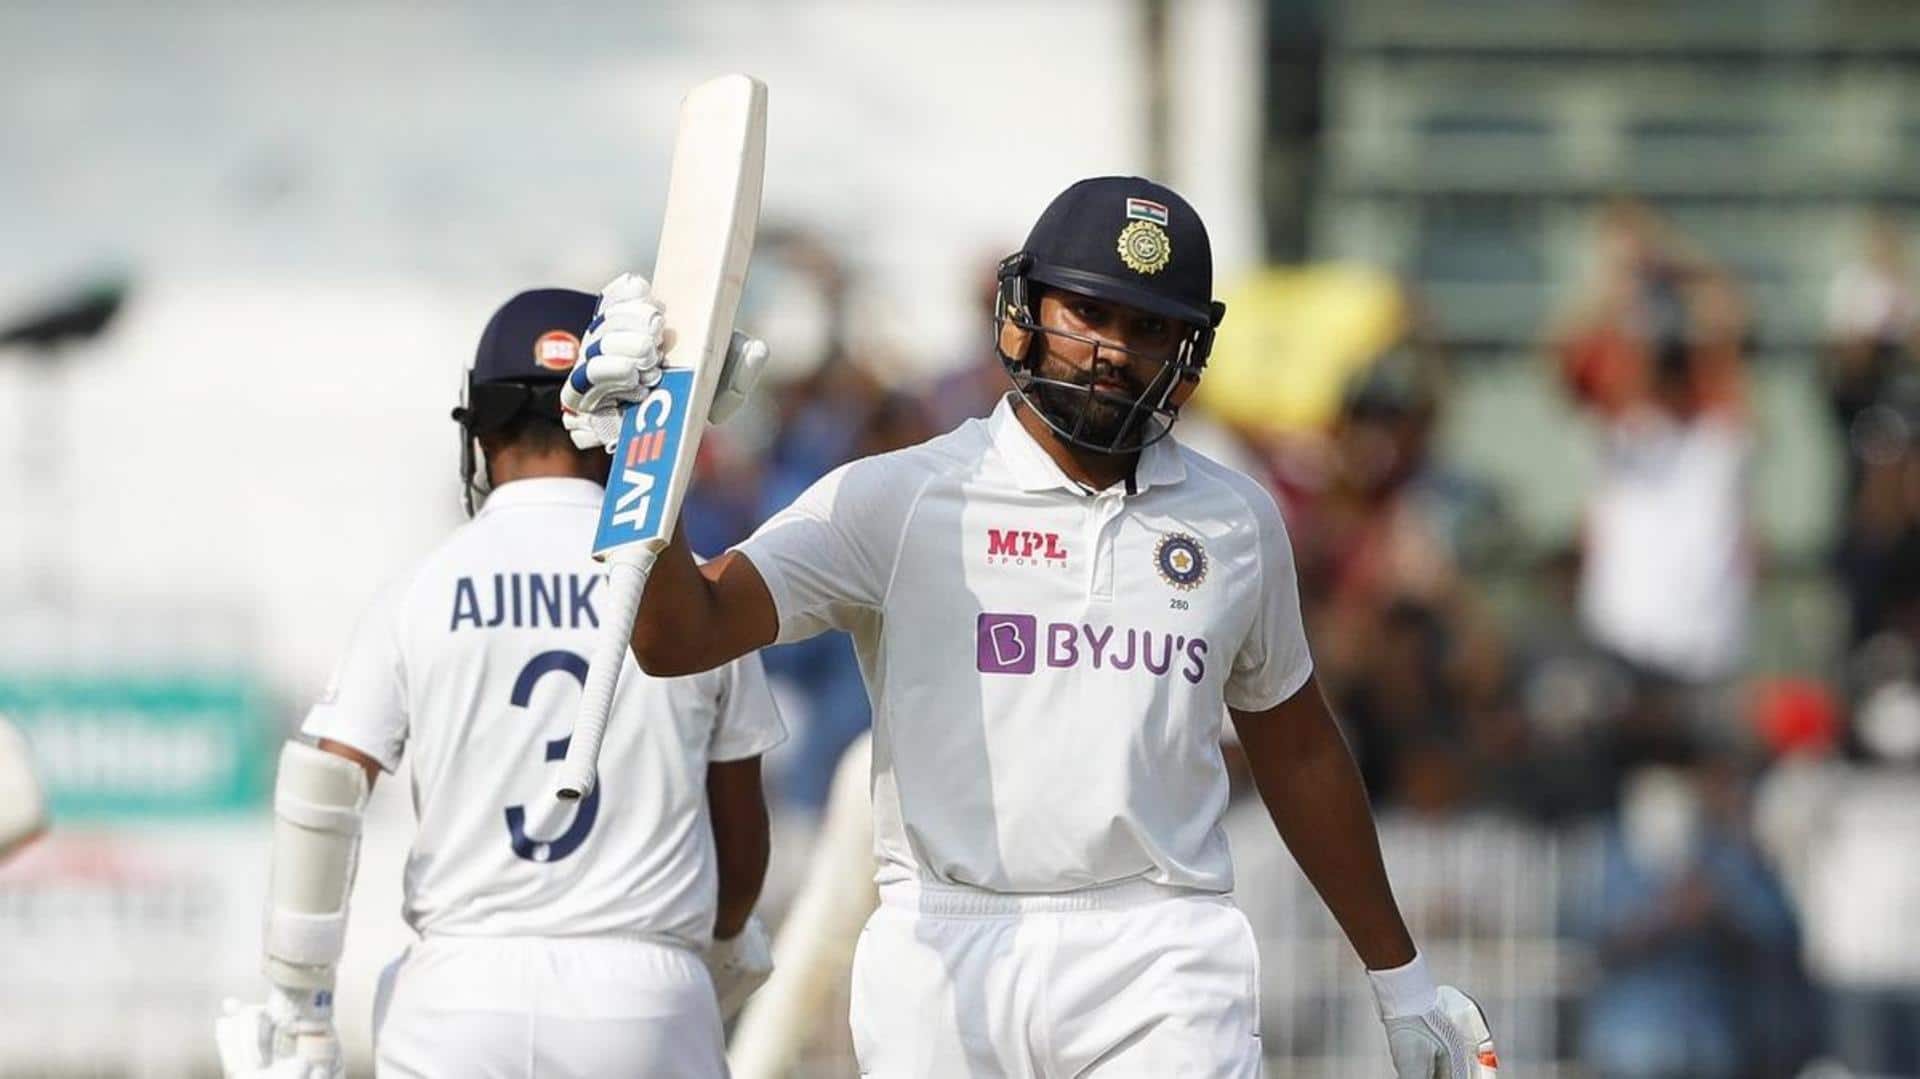 Rohit Sharma races past 2,000 Test runs as opener: Stats